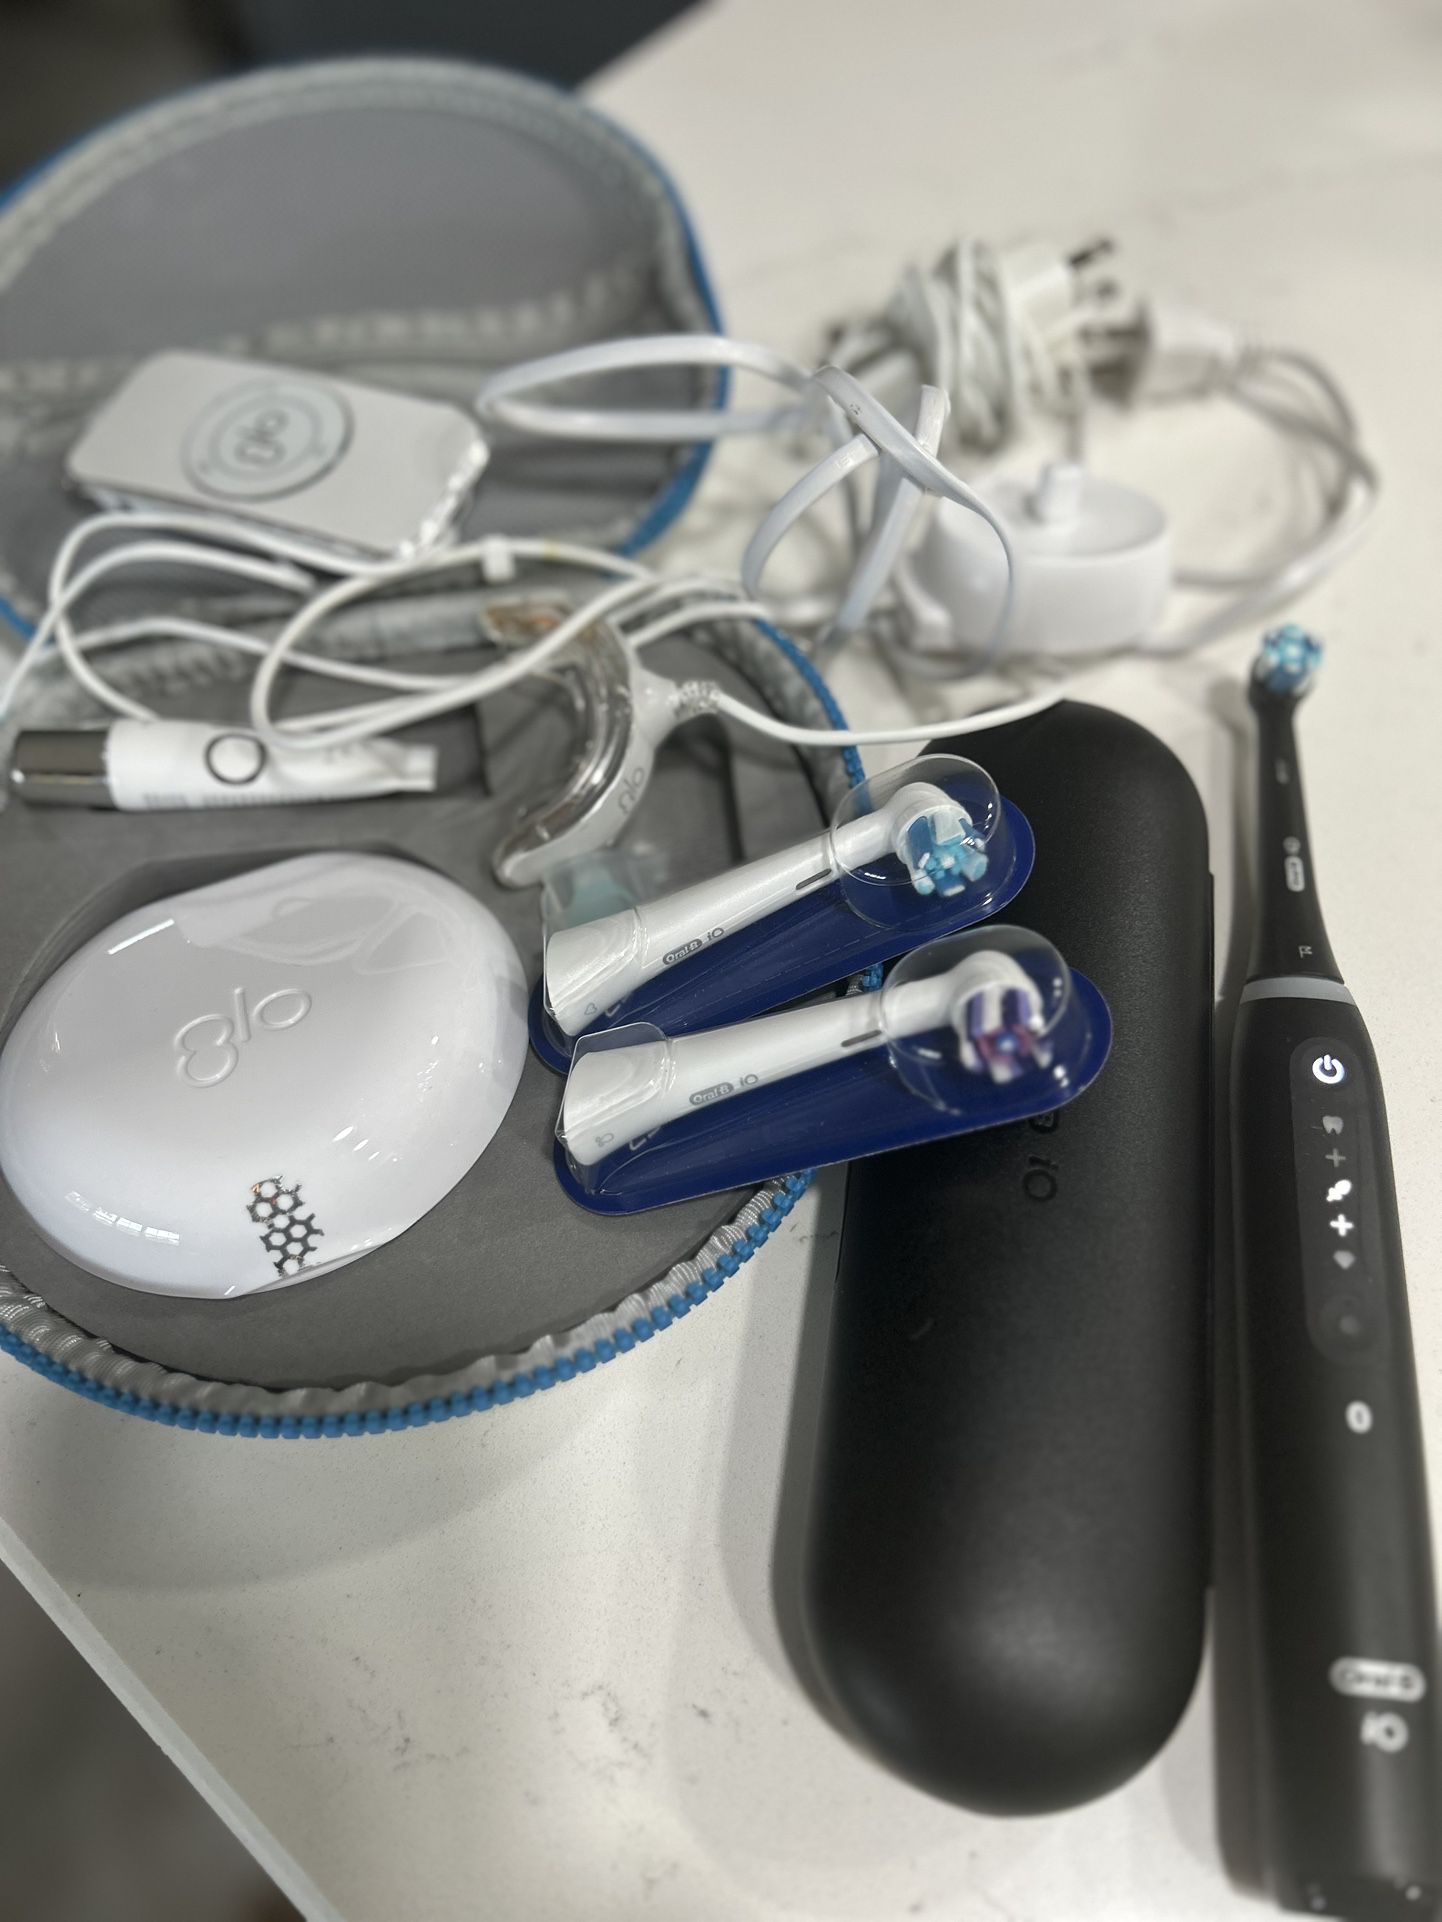 Teeth whitening system with electric toothbrush, and one extra brush